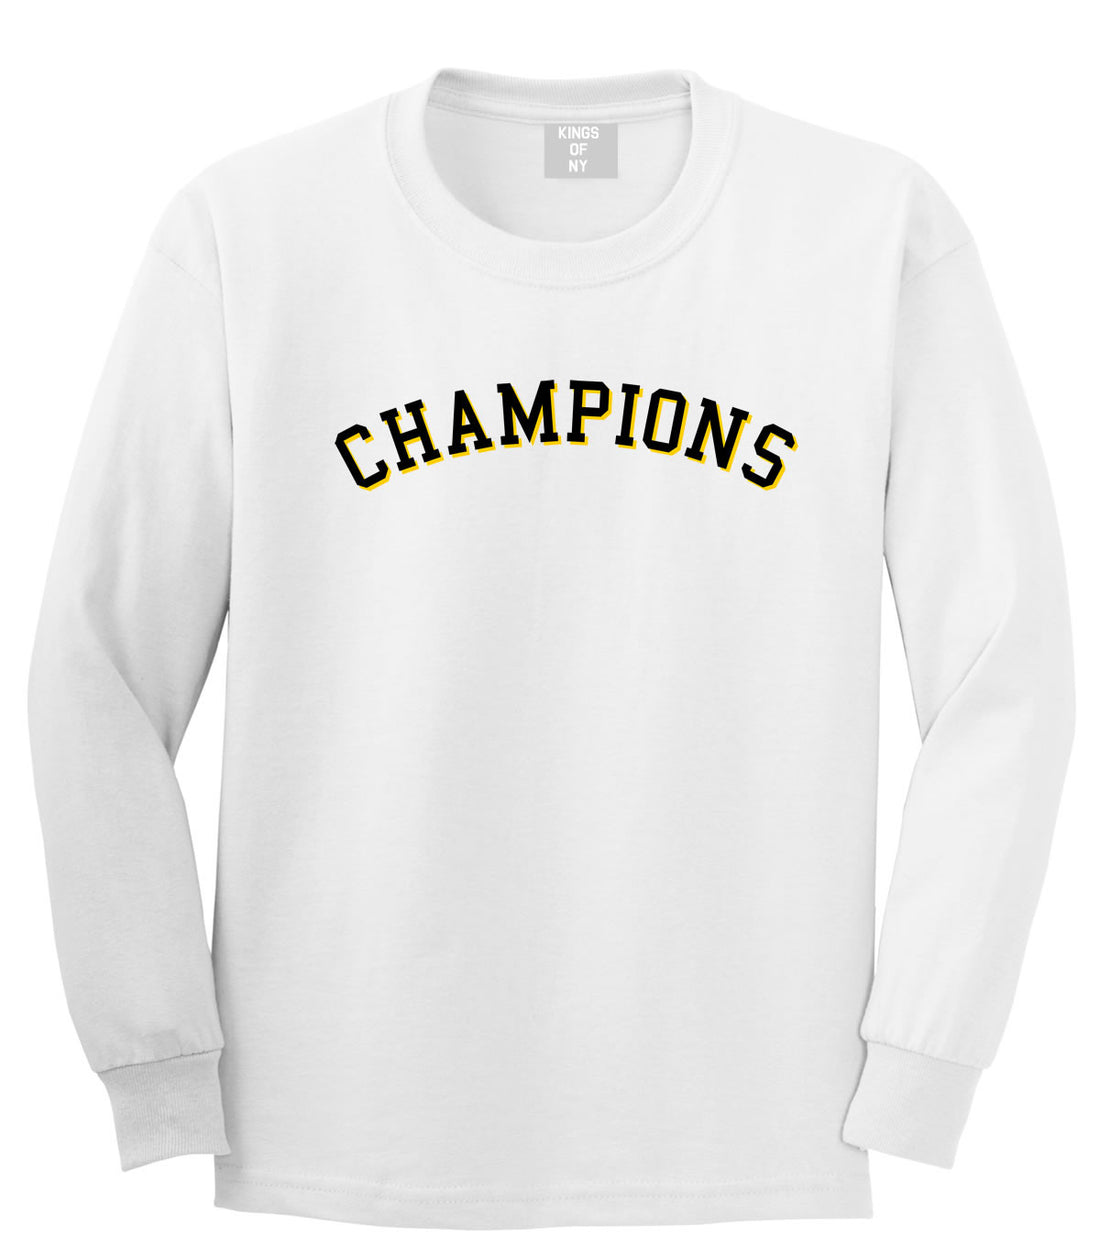 Champions Long Sleeve T-Shirt in White by Kings Of NY